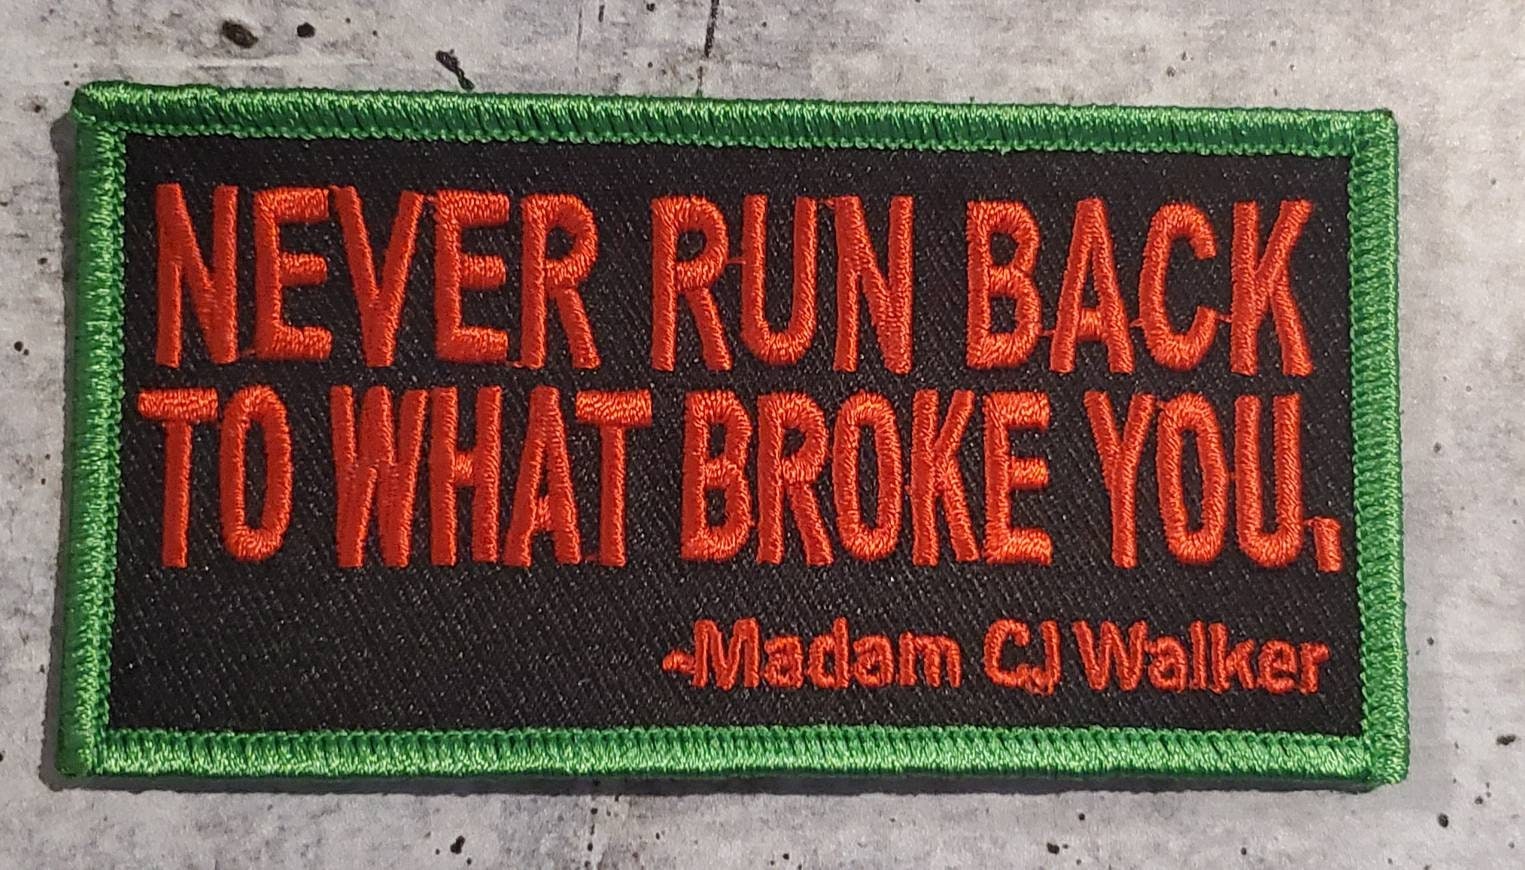 New Arrival,"Never Run Back to What Broke You" Madam CJ Walker Homage Badge, Iron-on Embroidered Patch, Craft Supplies, Small Patch, 3.75"